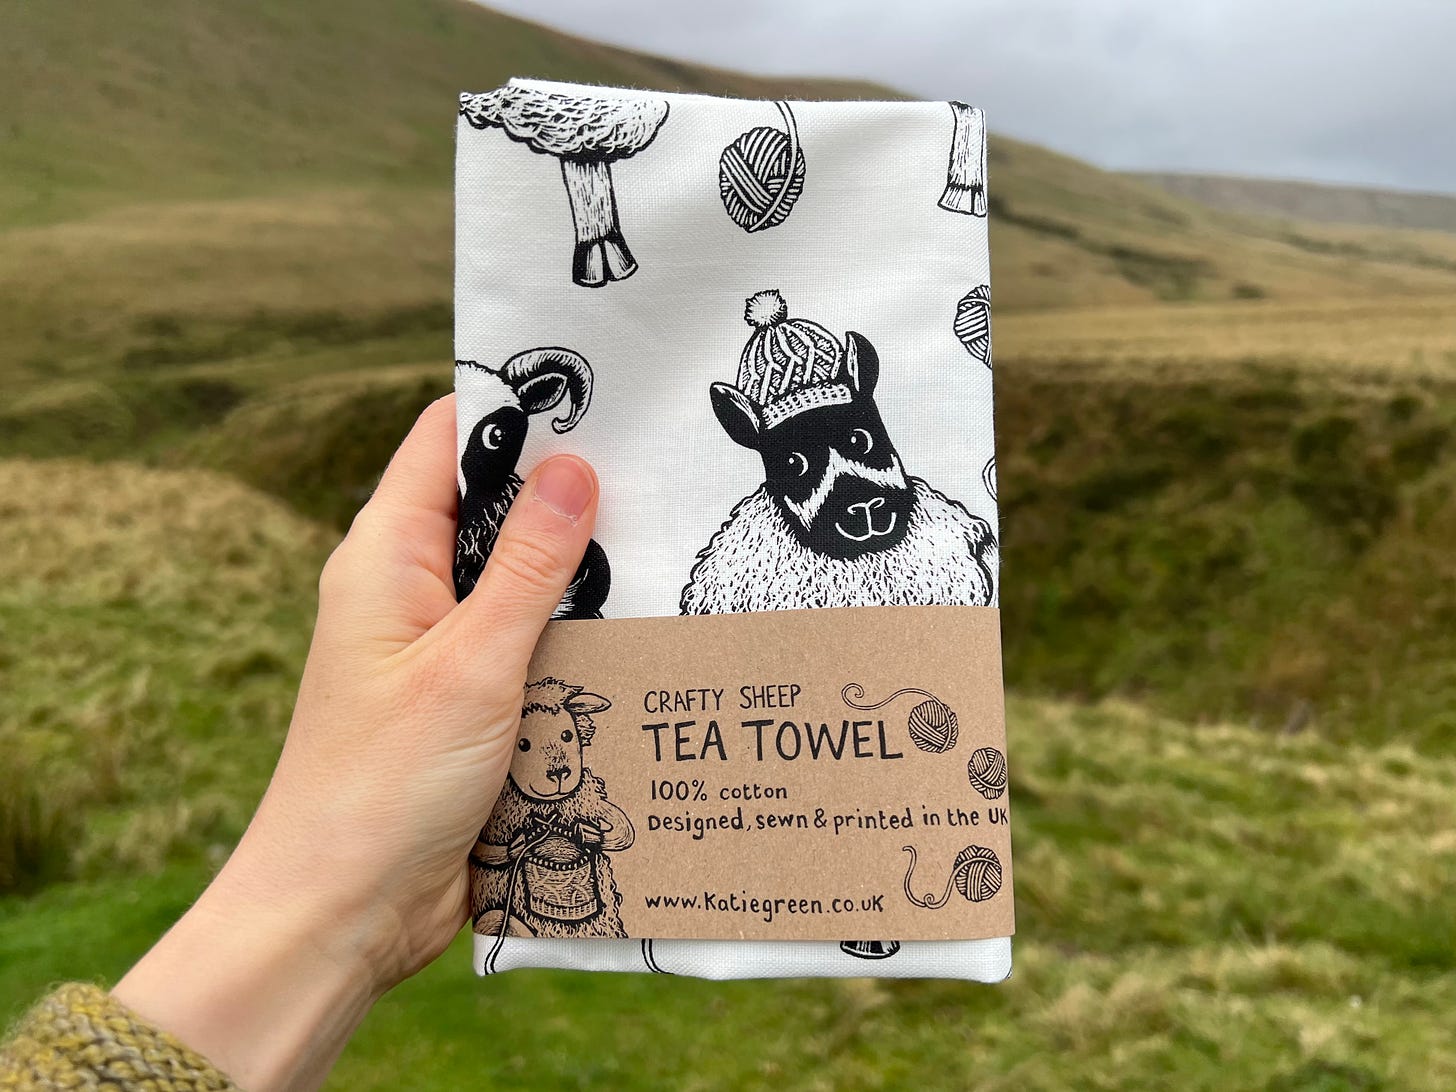 A white tea towel showing craft sheep held up in front of green rolling hills